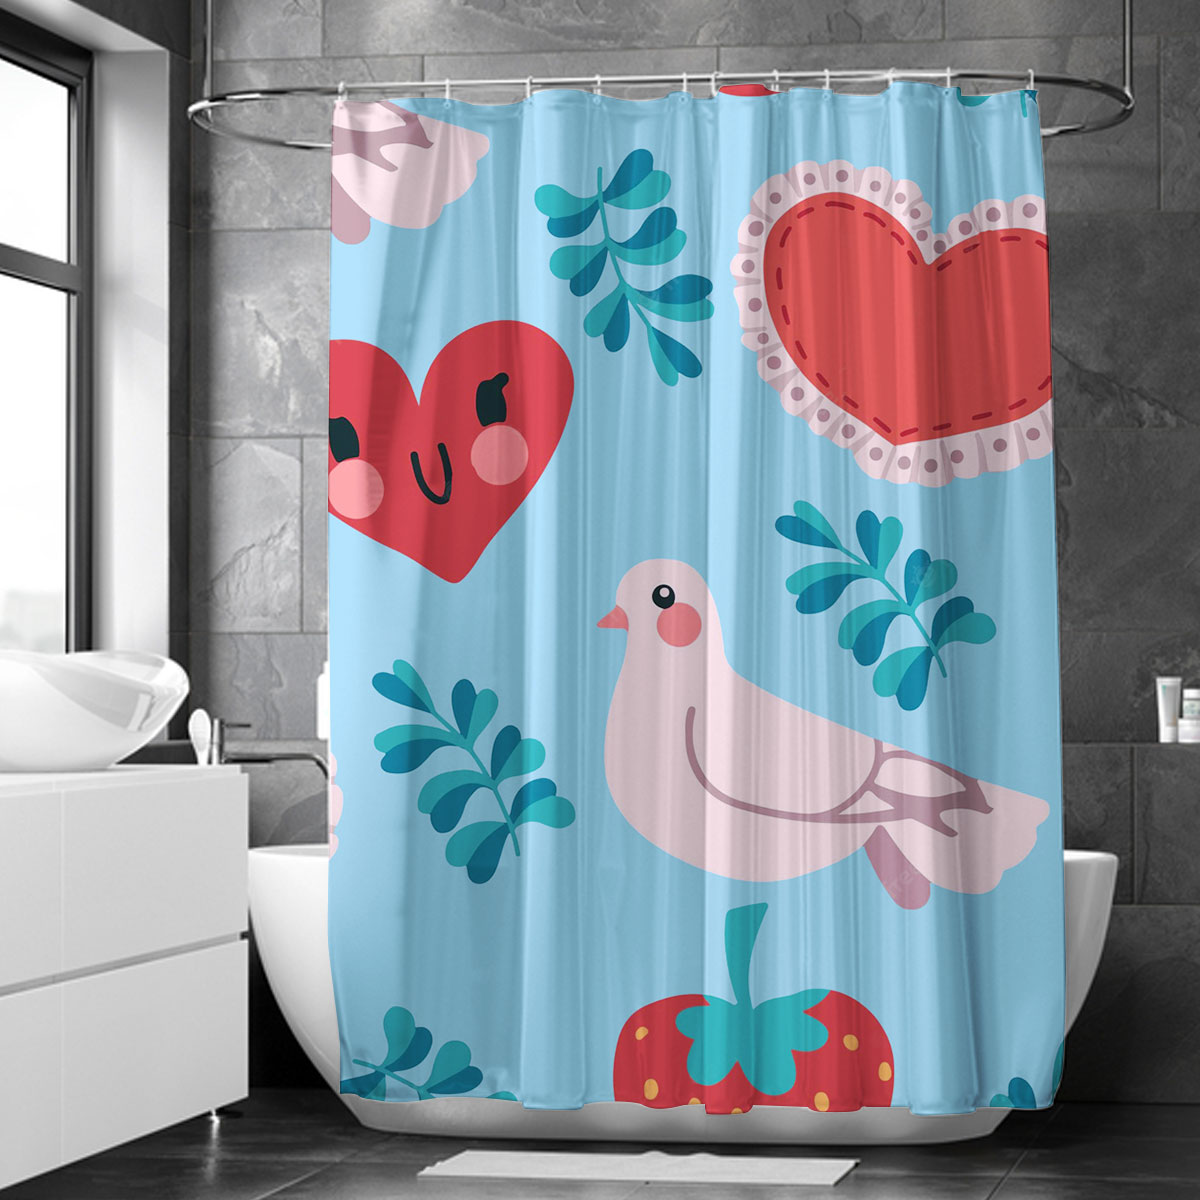 Coon Pink Dove He Shower Curtain 6